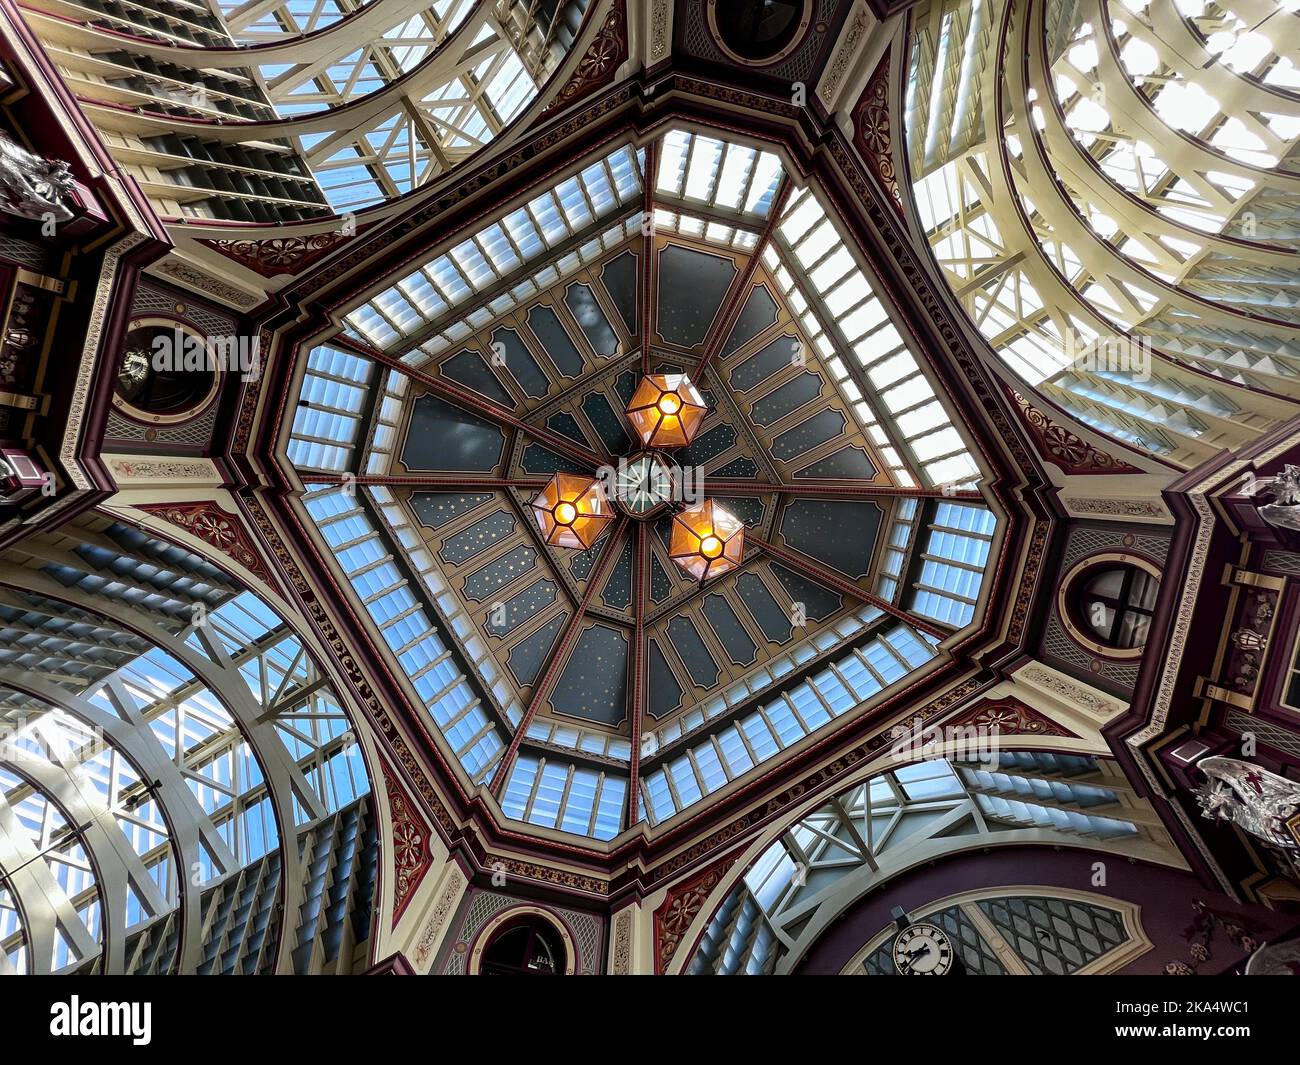 Low angle view of Leadenhall Market ceiling, London, England, UK Stock Photo